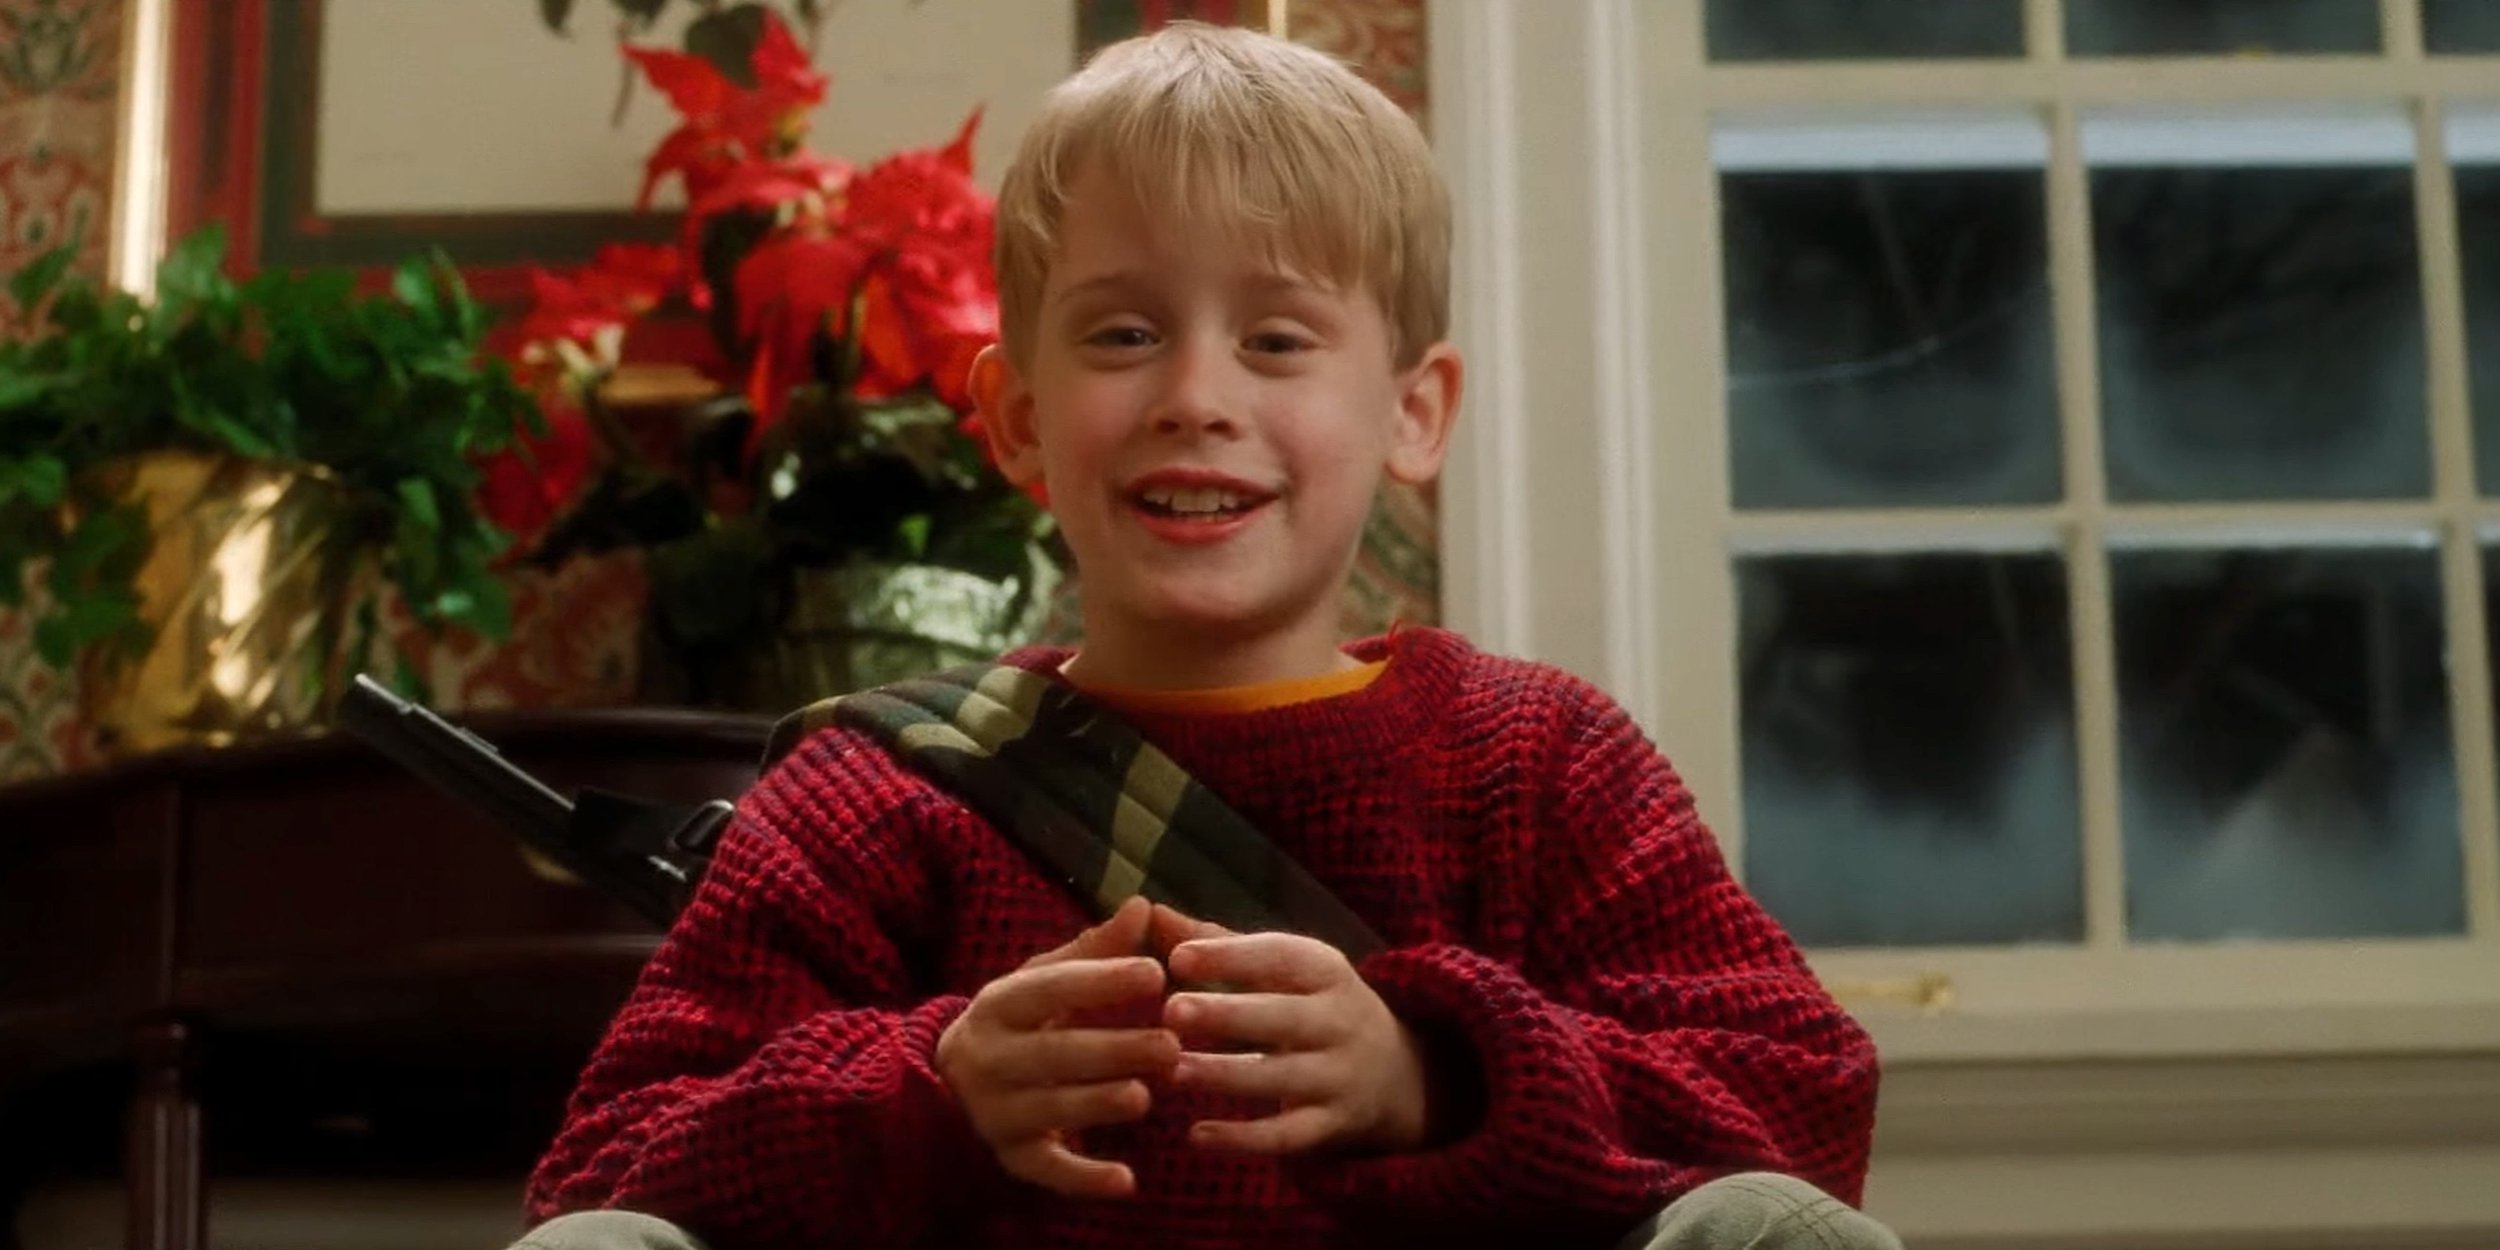 Six questions I have about Home Alone after re-watching it as an adult